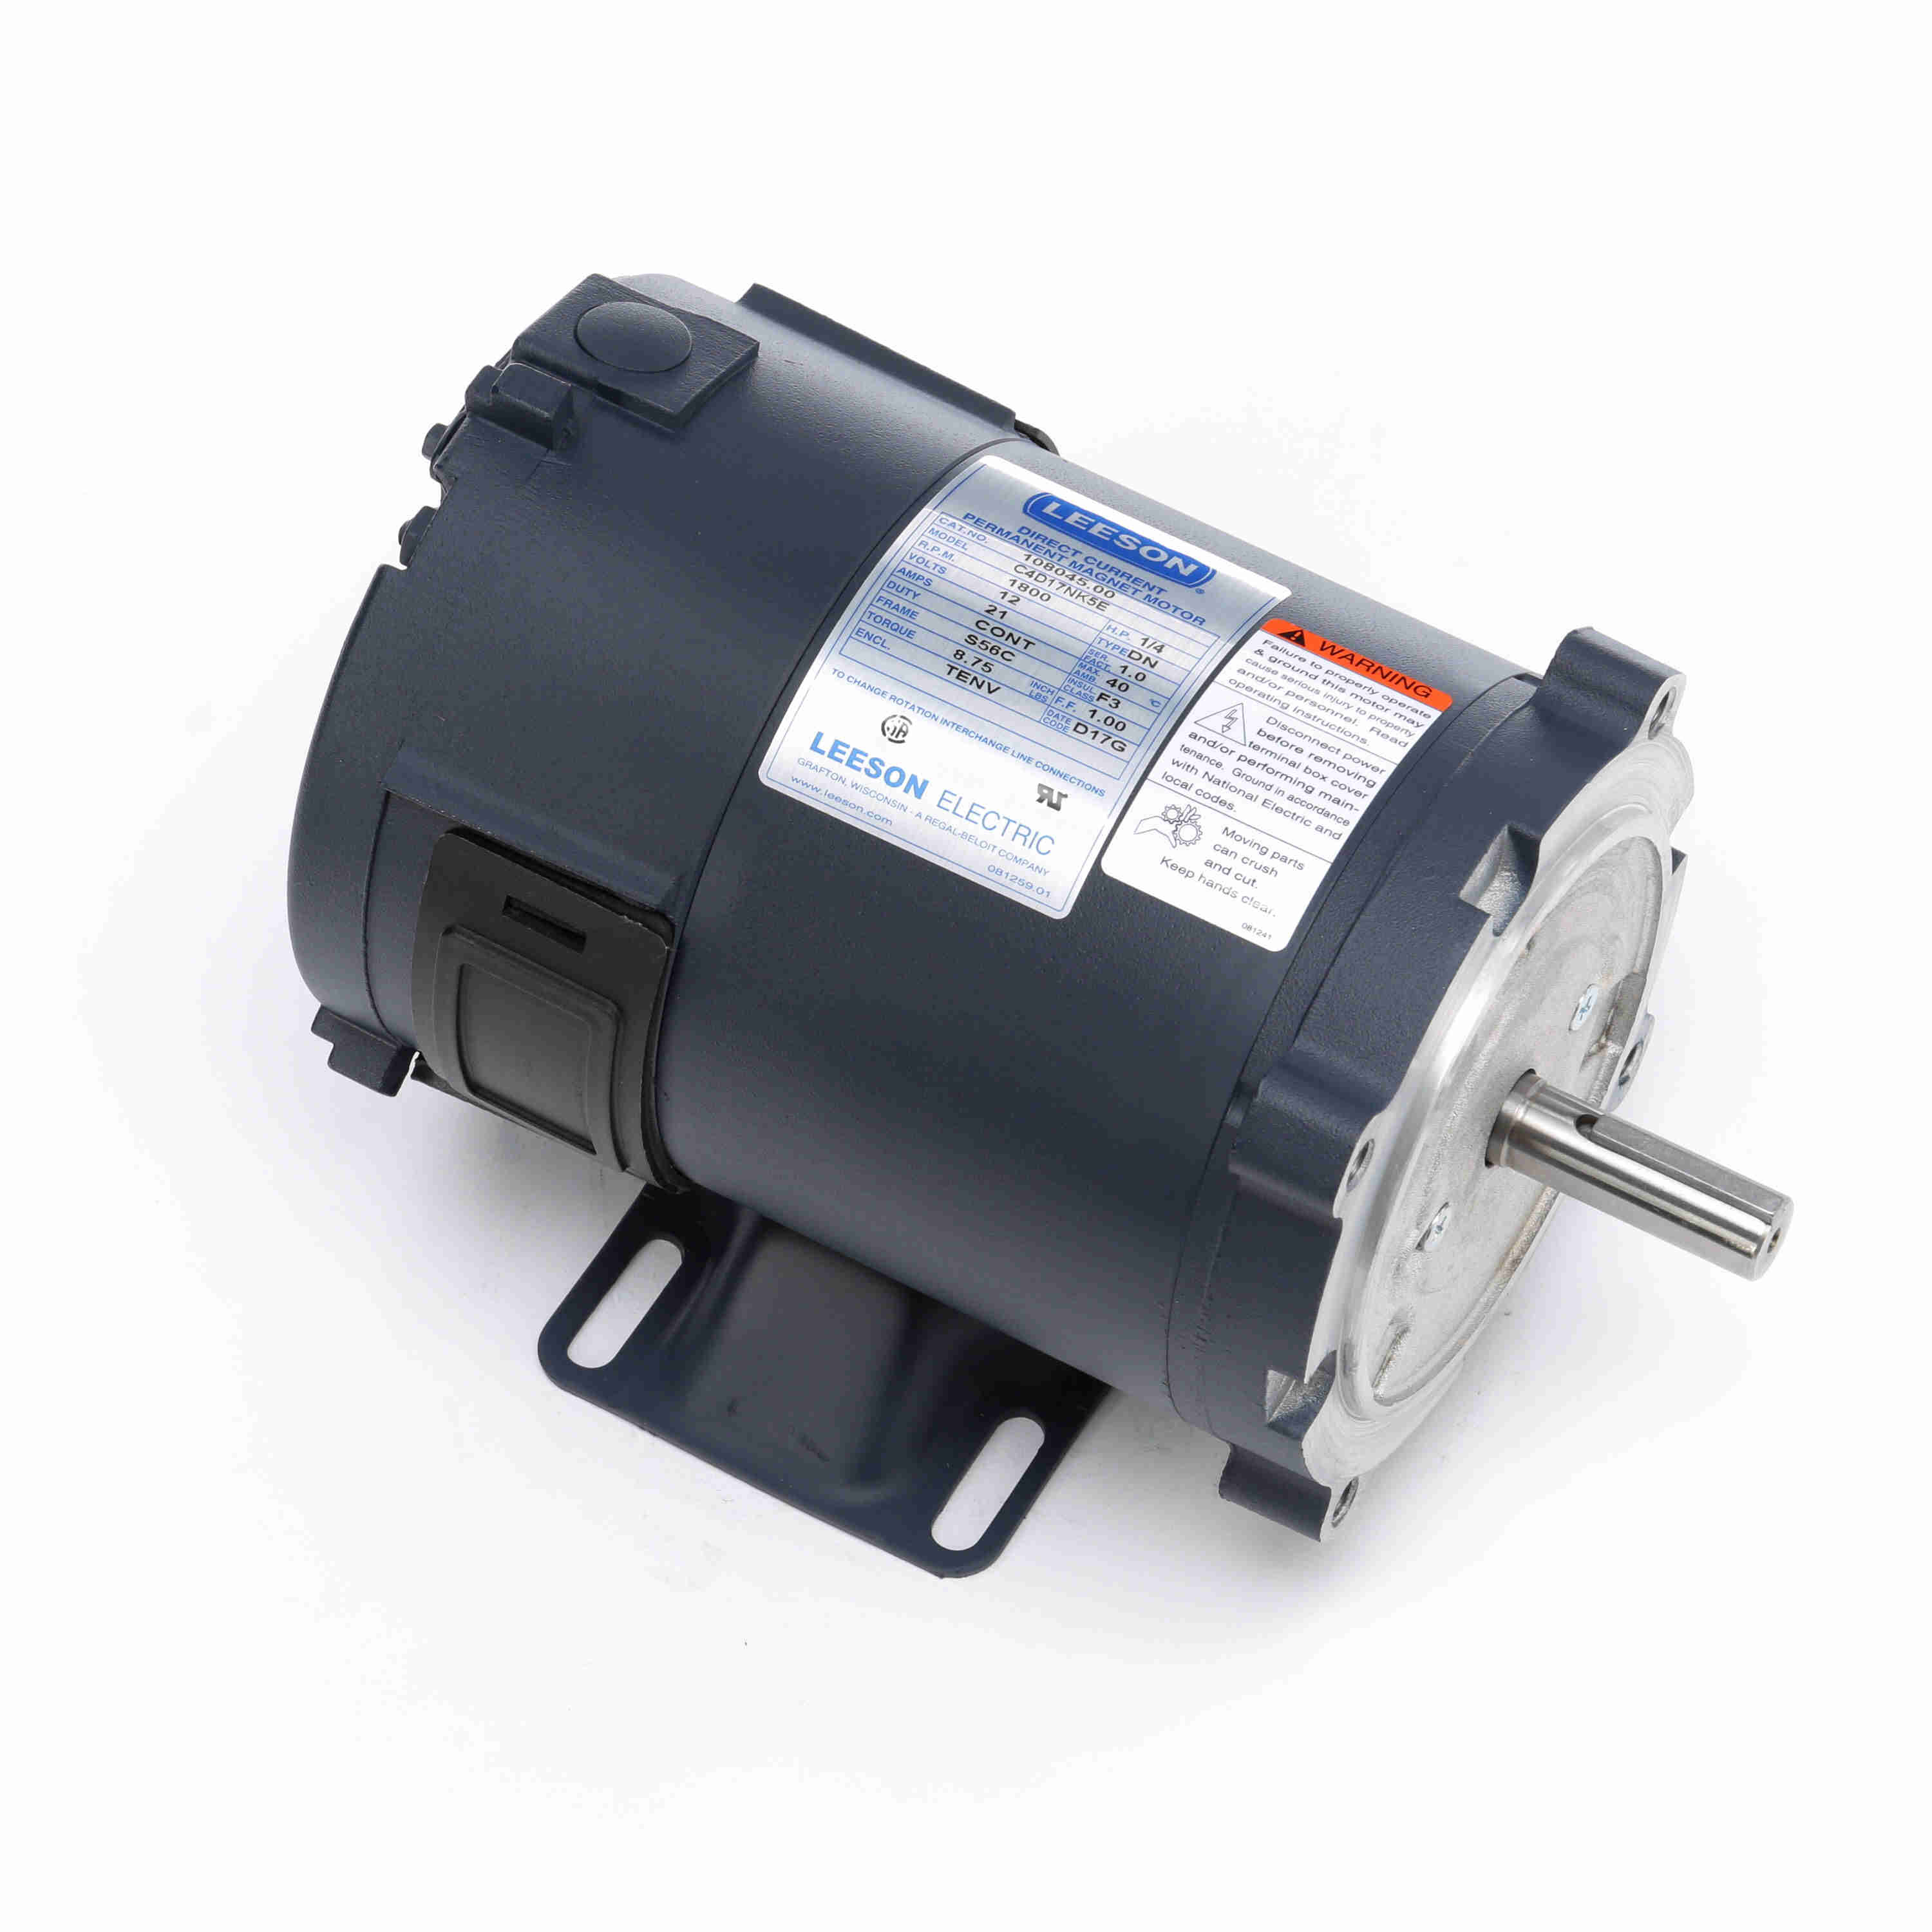 108045.00 Leeson 0.25HP Low Voltage DC Electric Motor, 1800RPM 4